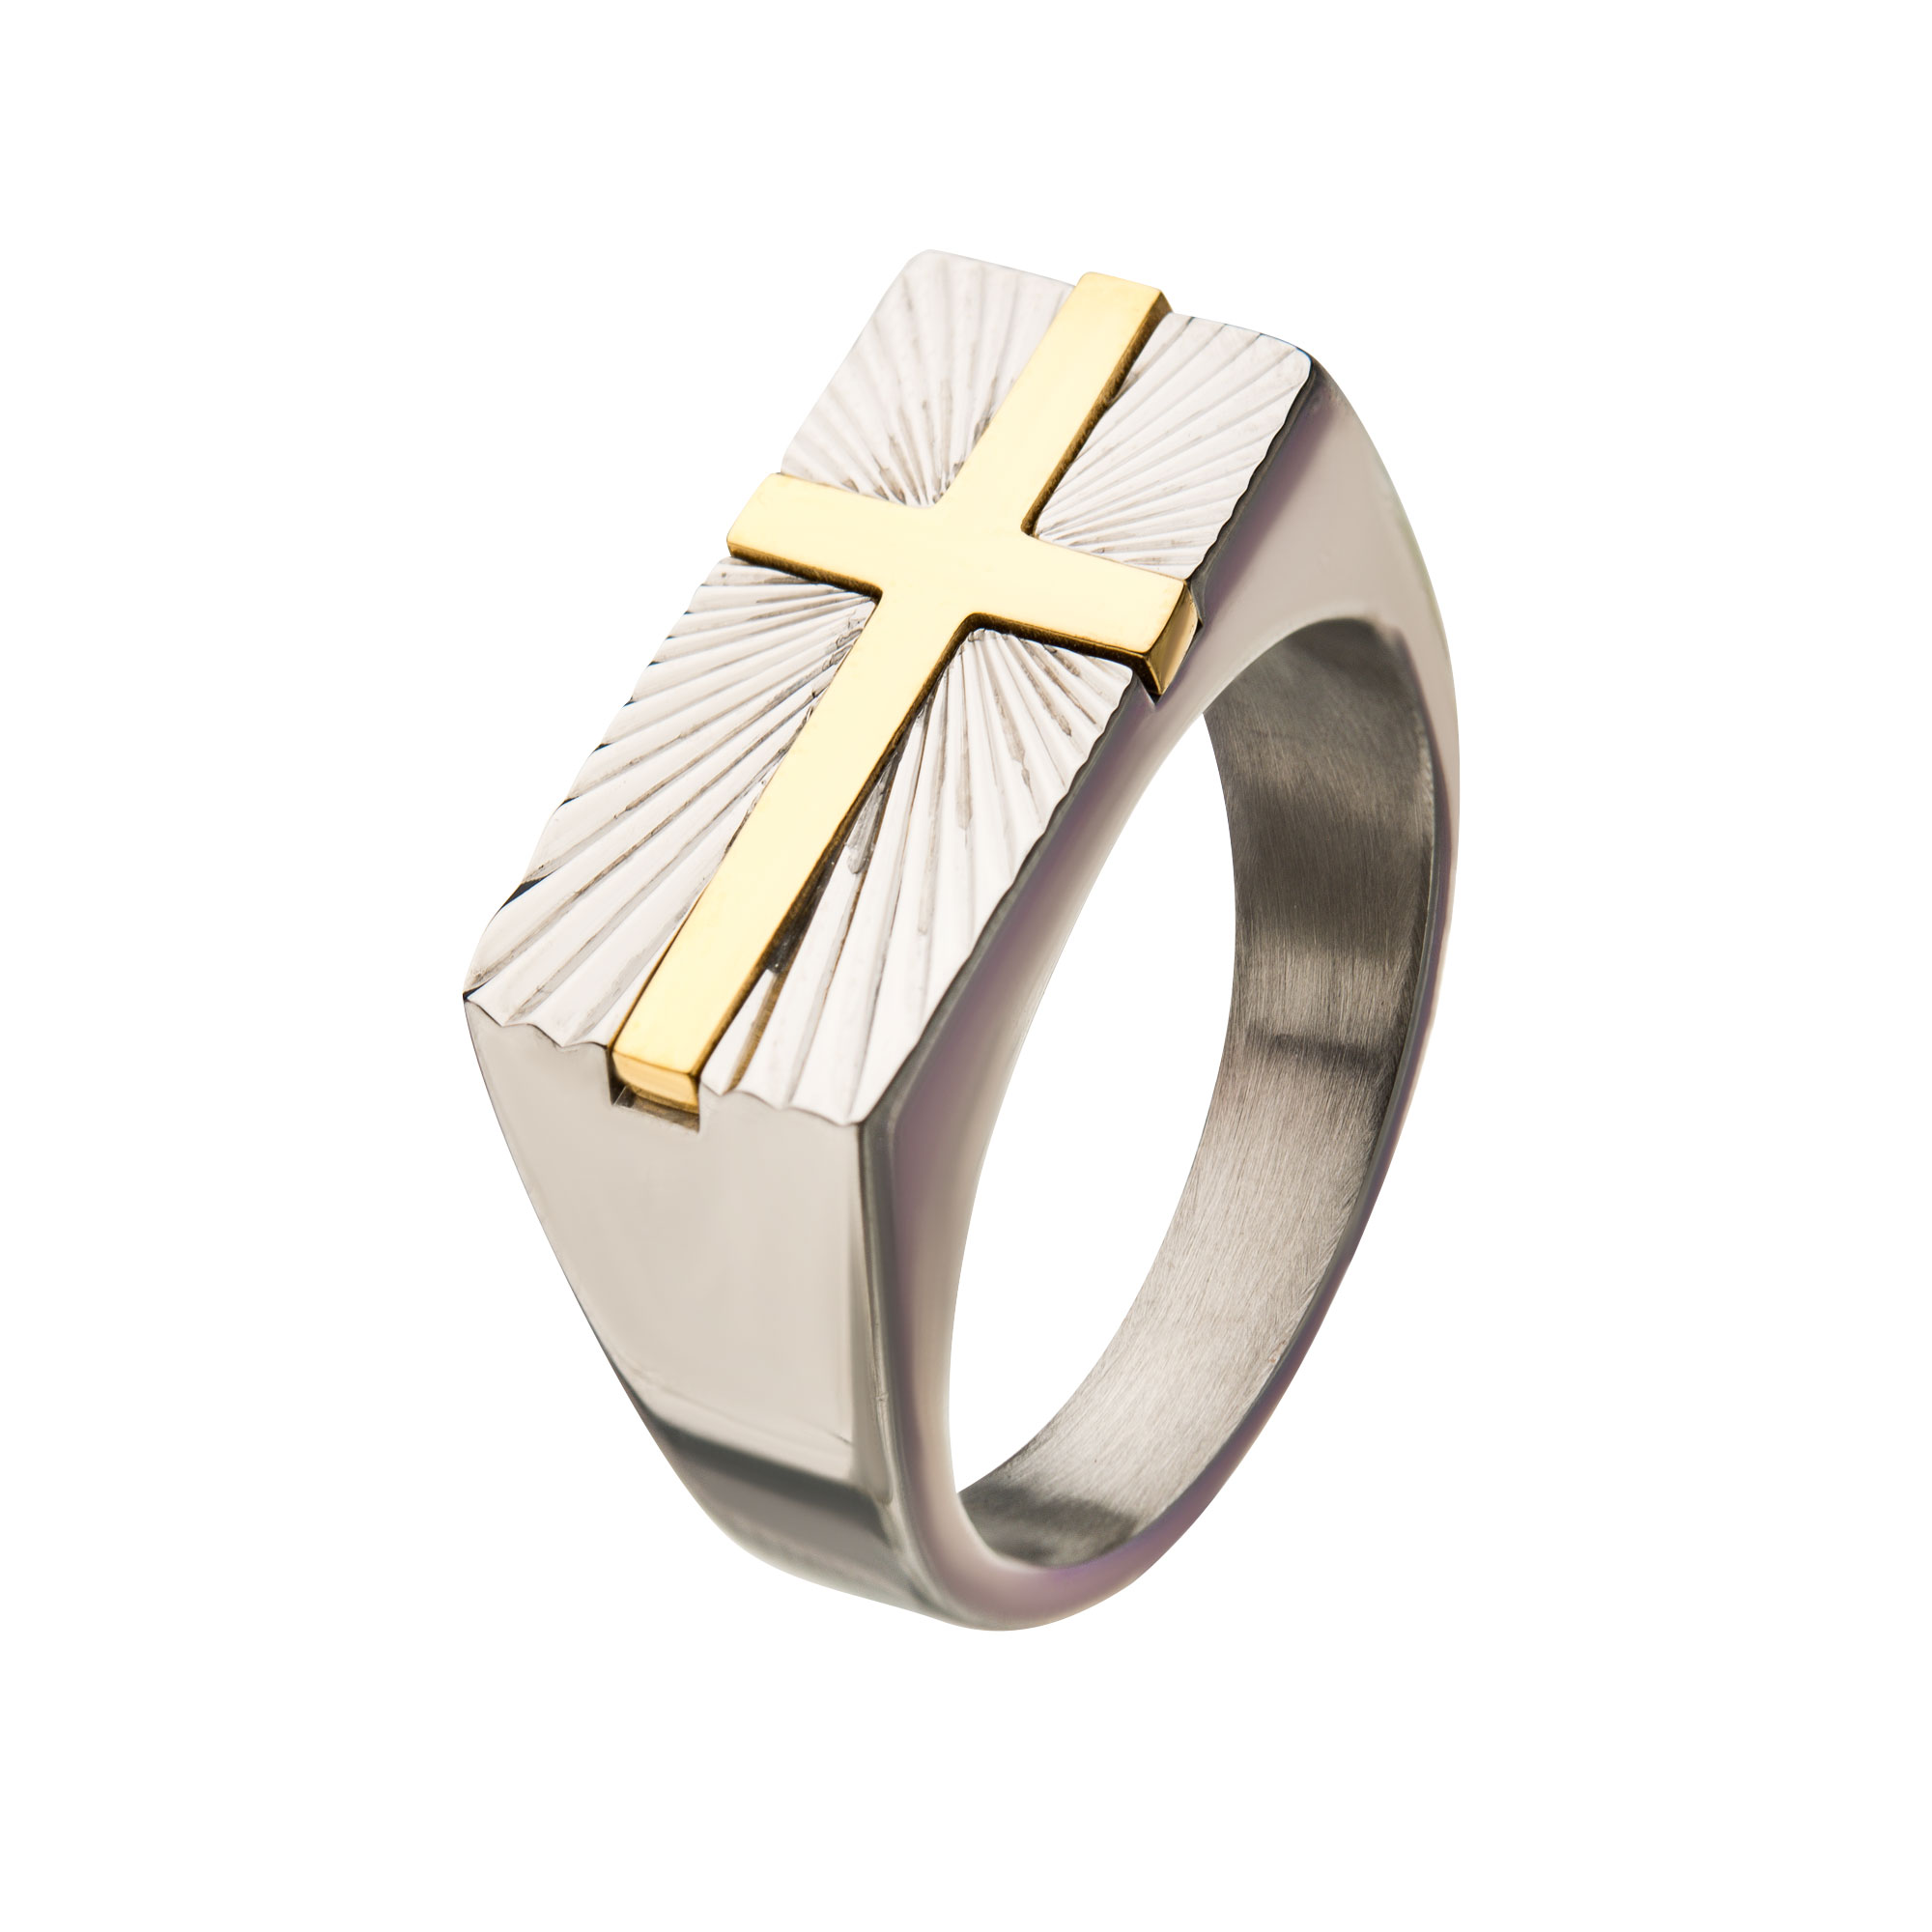 Stainless Steel with  Gold Plated Transfiguration Cross Ring Selman's Jewelers-Gemologist McComb, MS